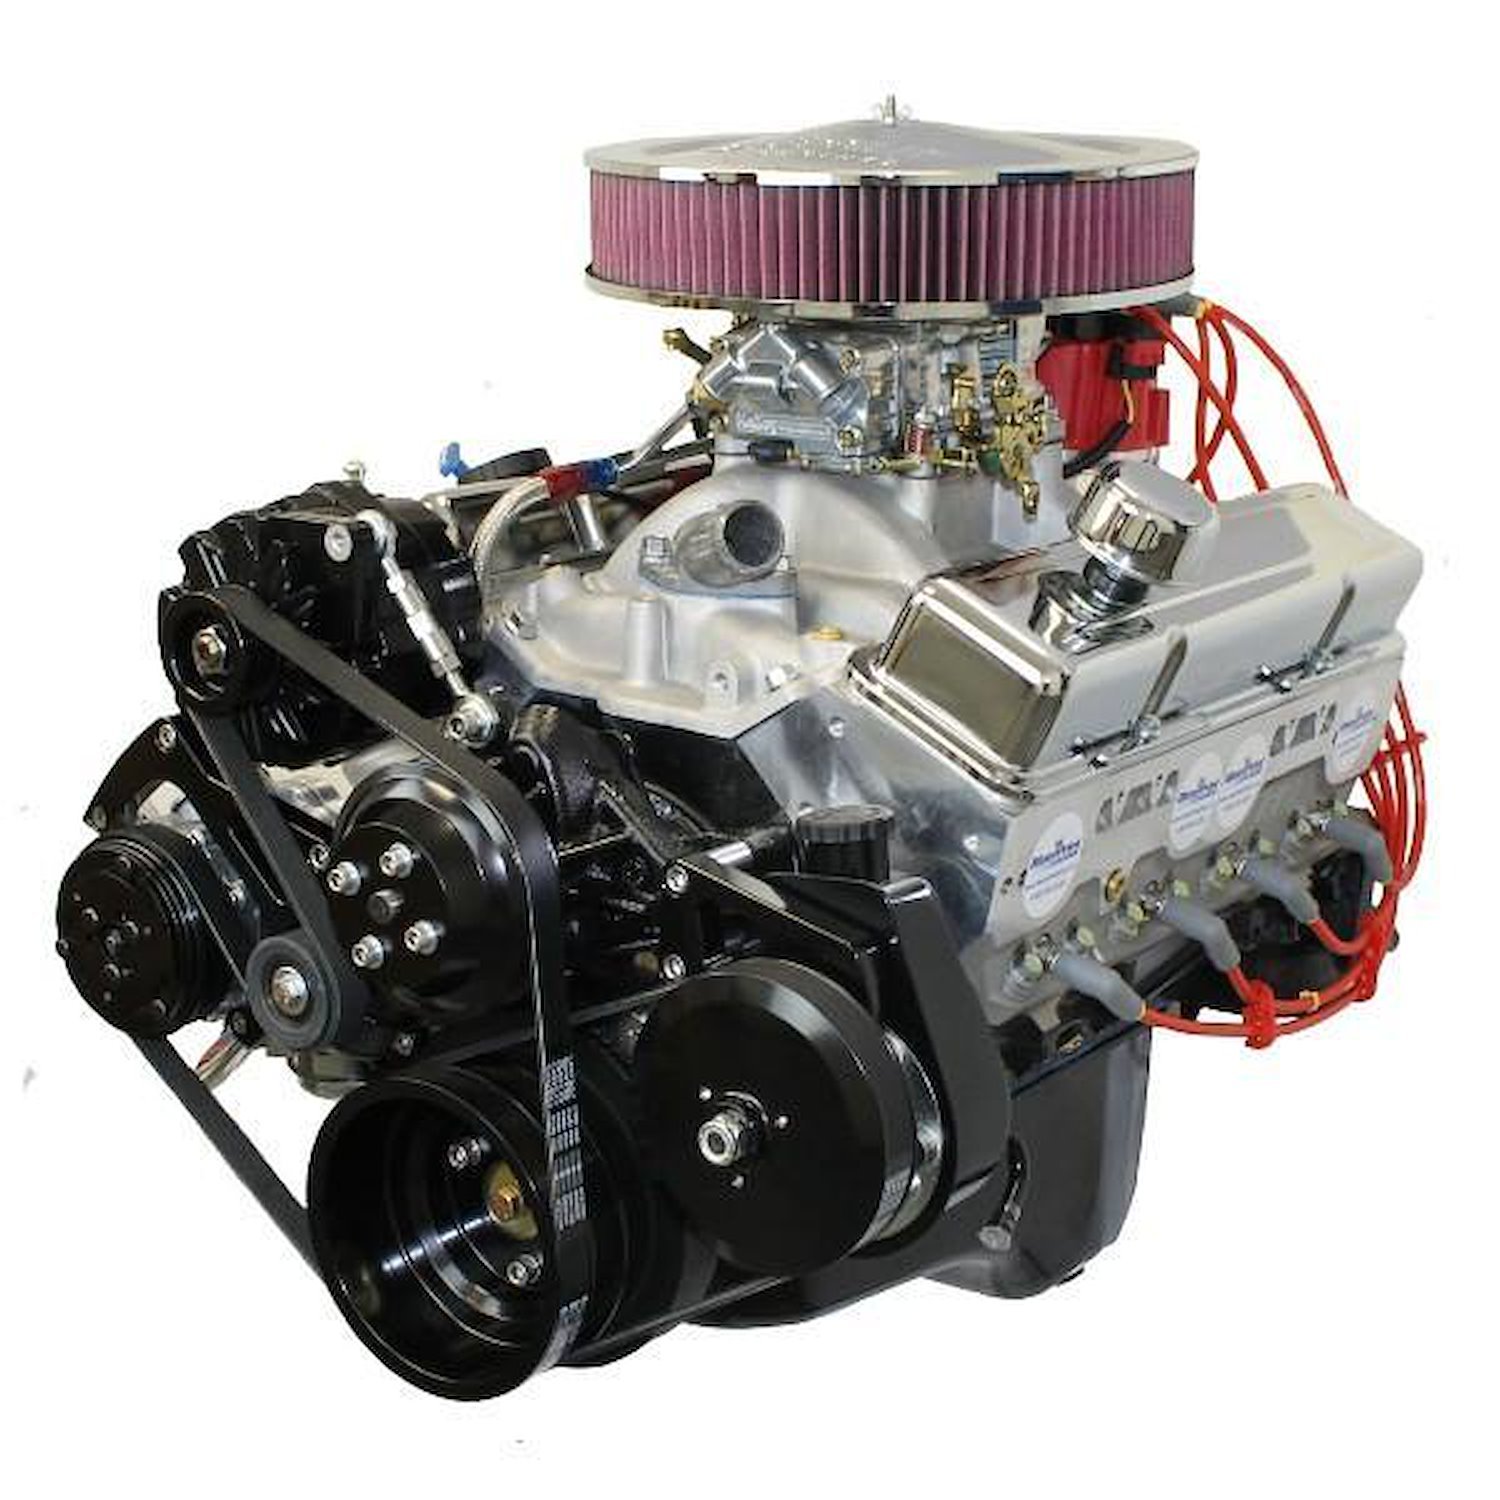 New Block Casting 350 ci Cruiser Crate Engine [Fuel Injected w/Front Accessory Drive]